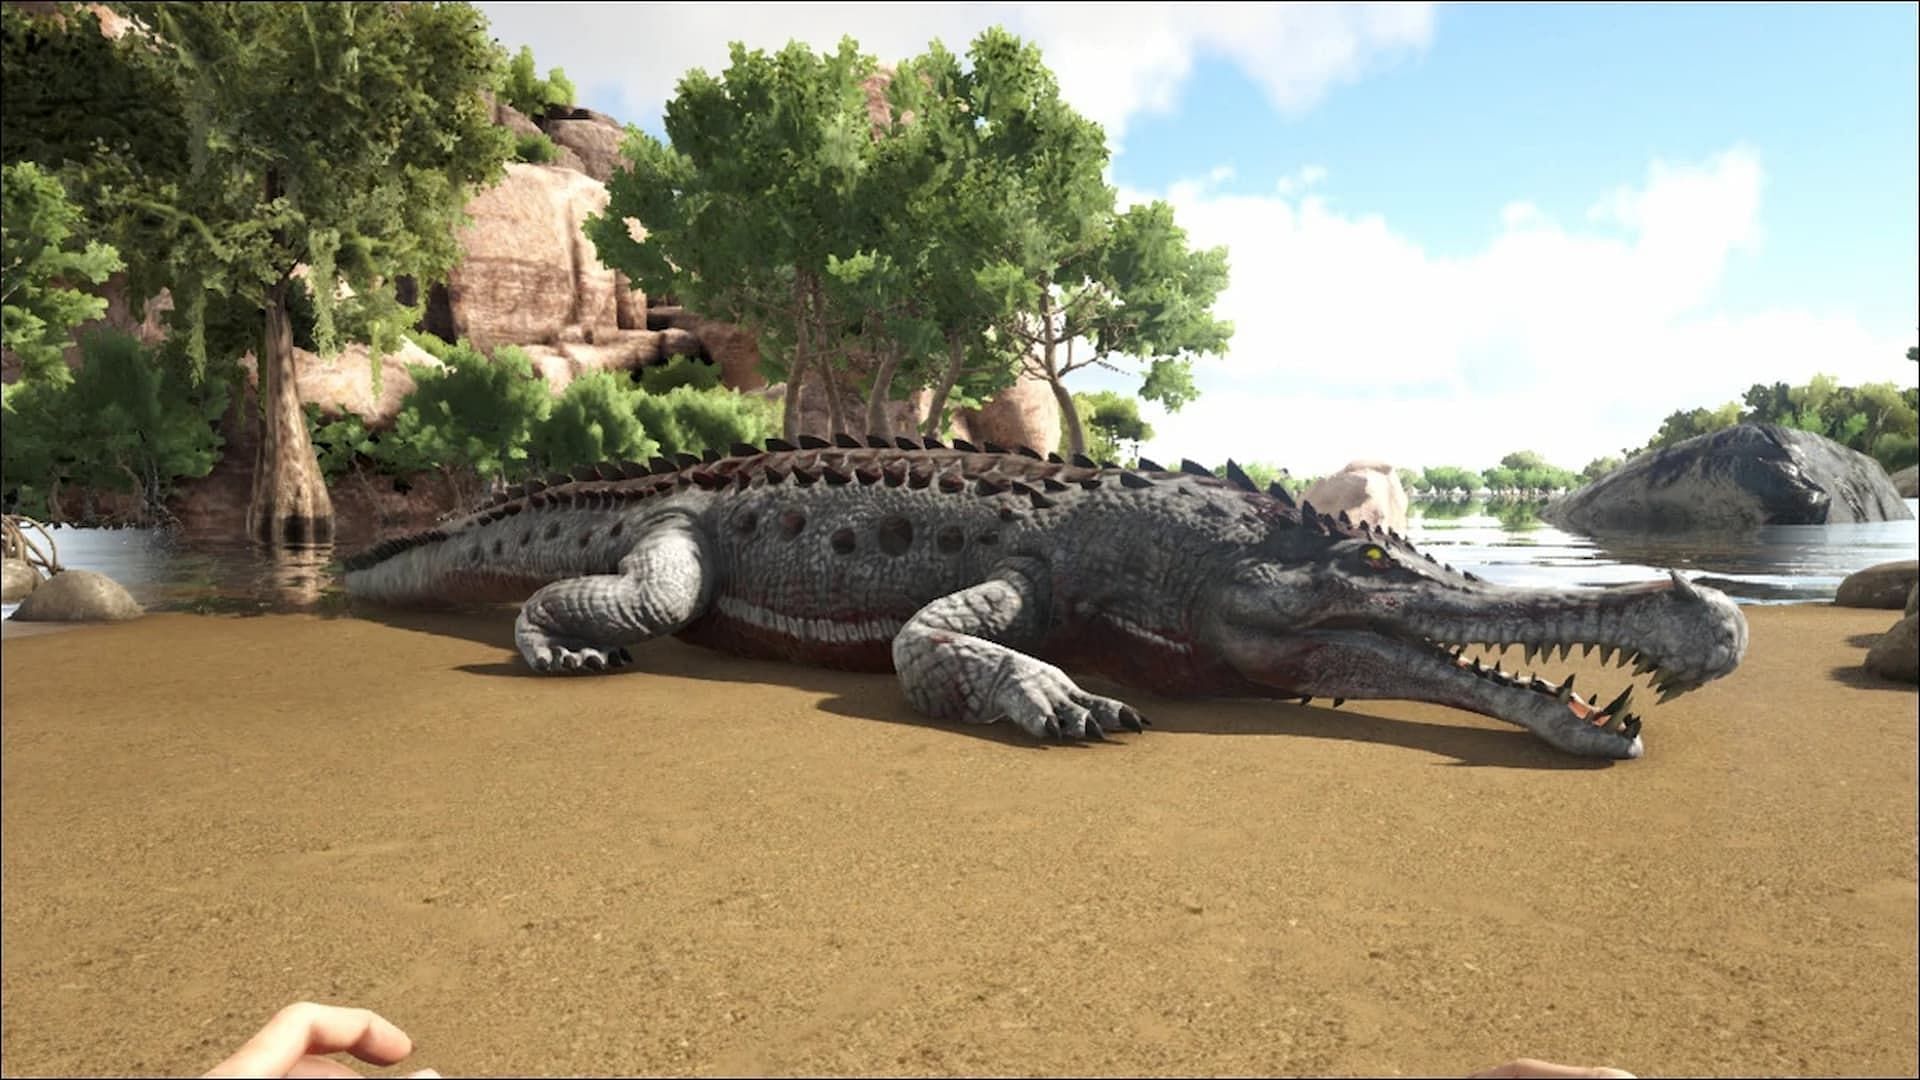 The Sarcosuchus is a giant crocodile in ARK Survival Ascended